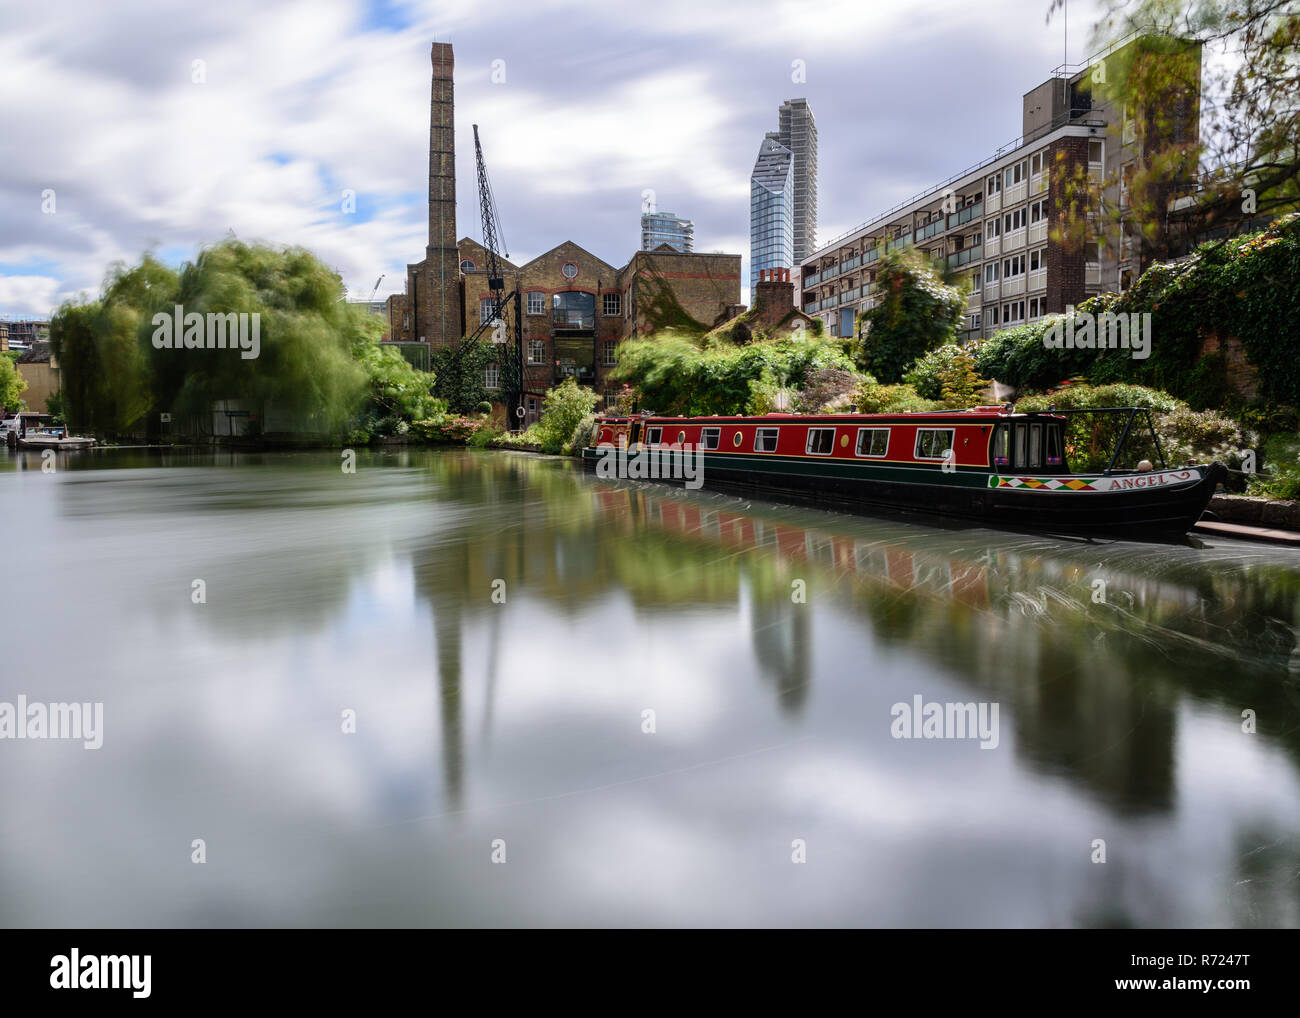 London, England, UK - September 21, 2018: Trees are blown in the wind at City Road Lock on the Regent's Canal, beside a traditional narrowboat and ind Stock Photo